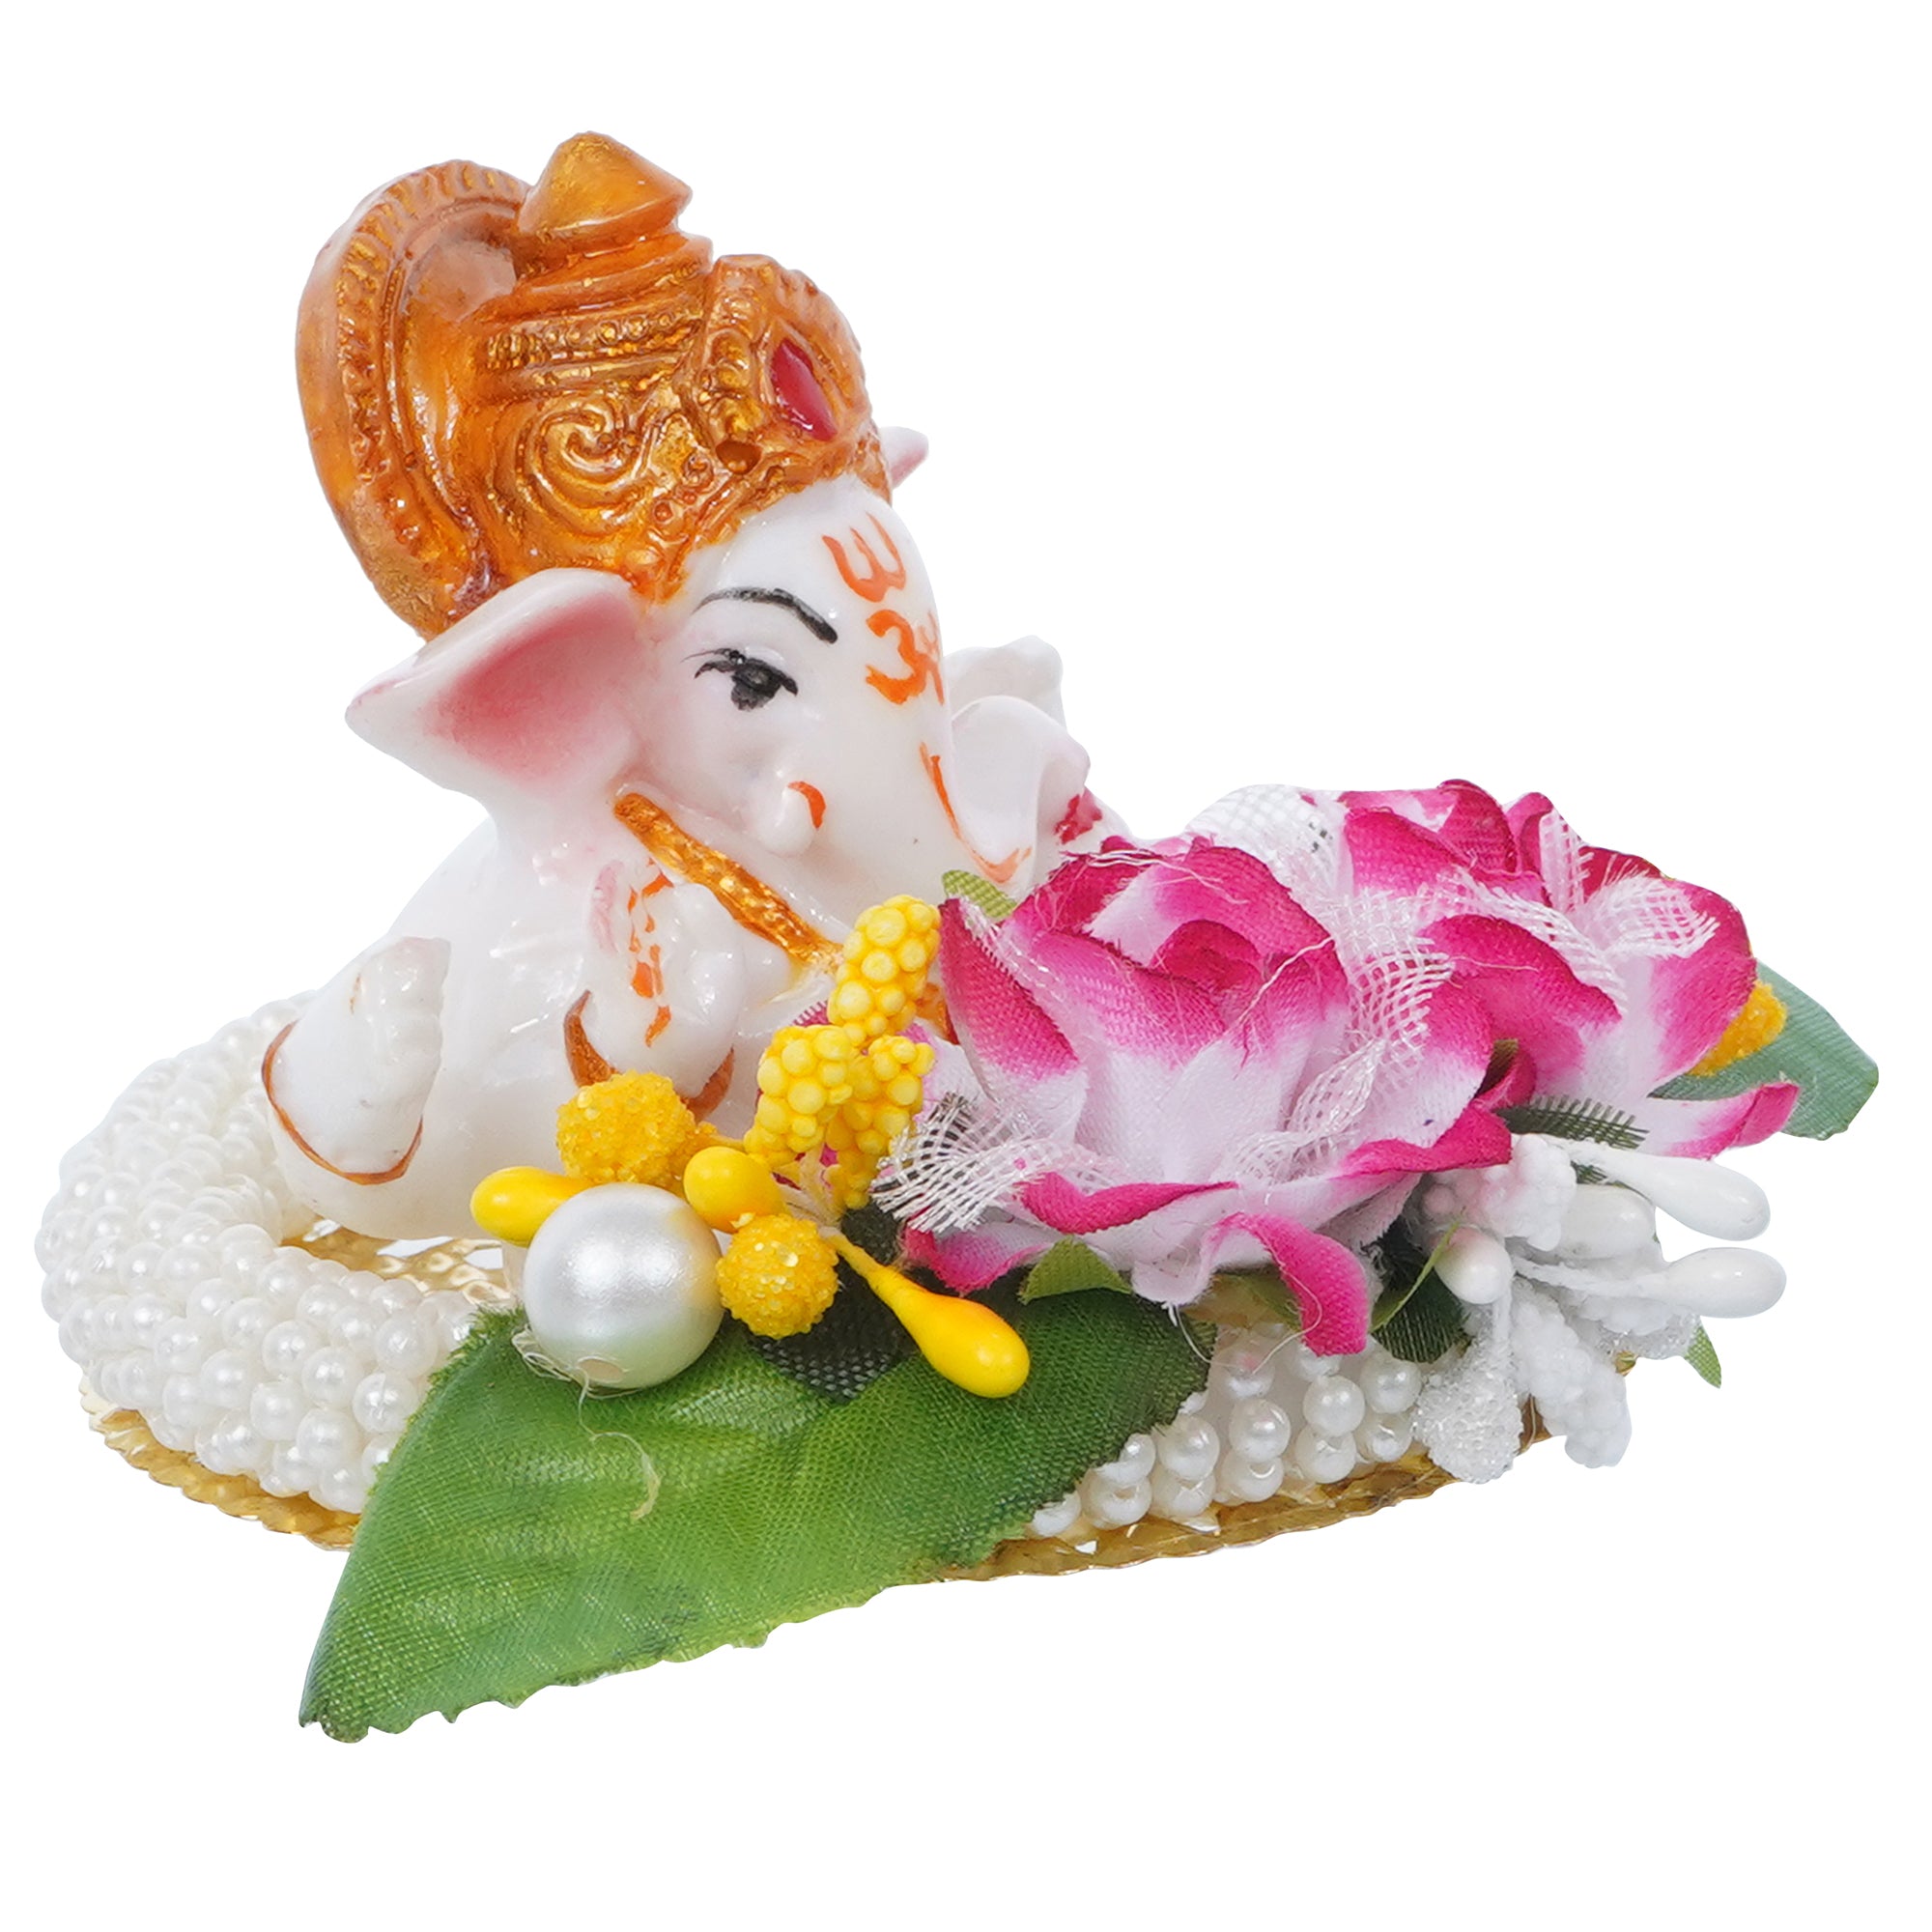 Lord Ganesha Idol on Decorative Handcrafted Plate with Colorful Flowers and Leaf 4